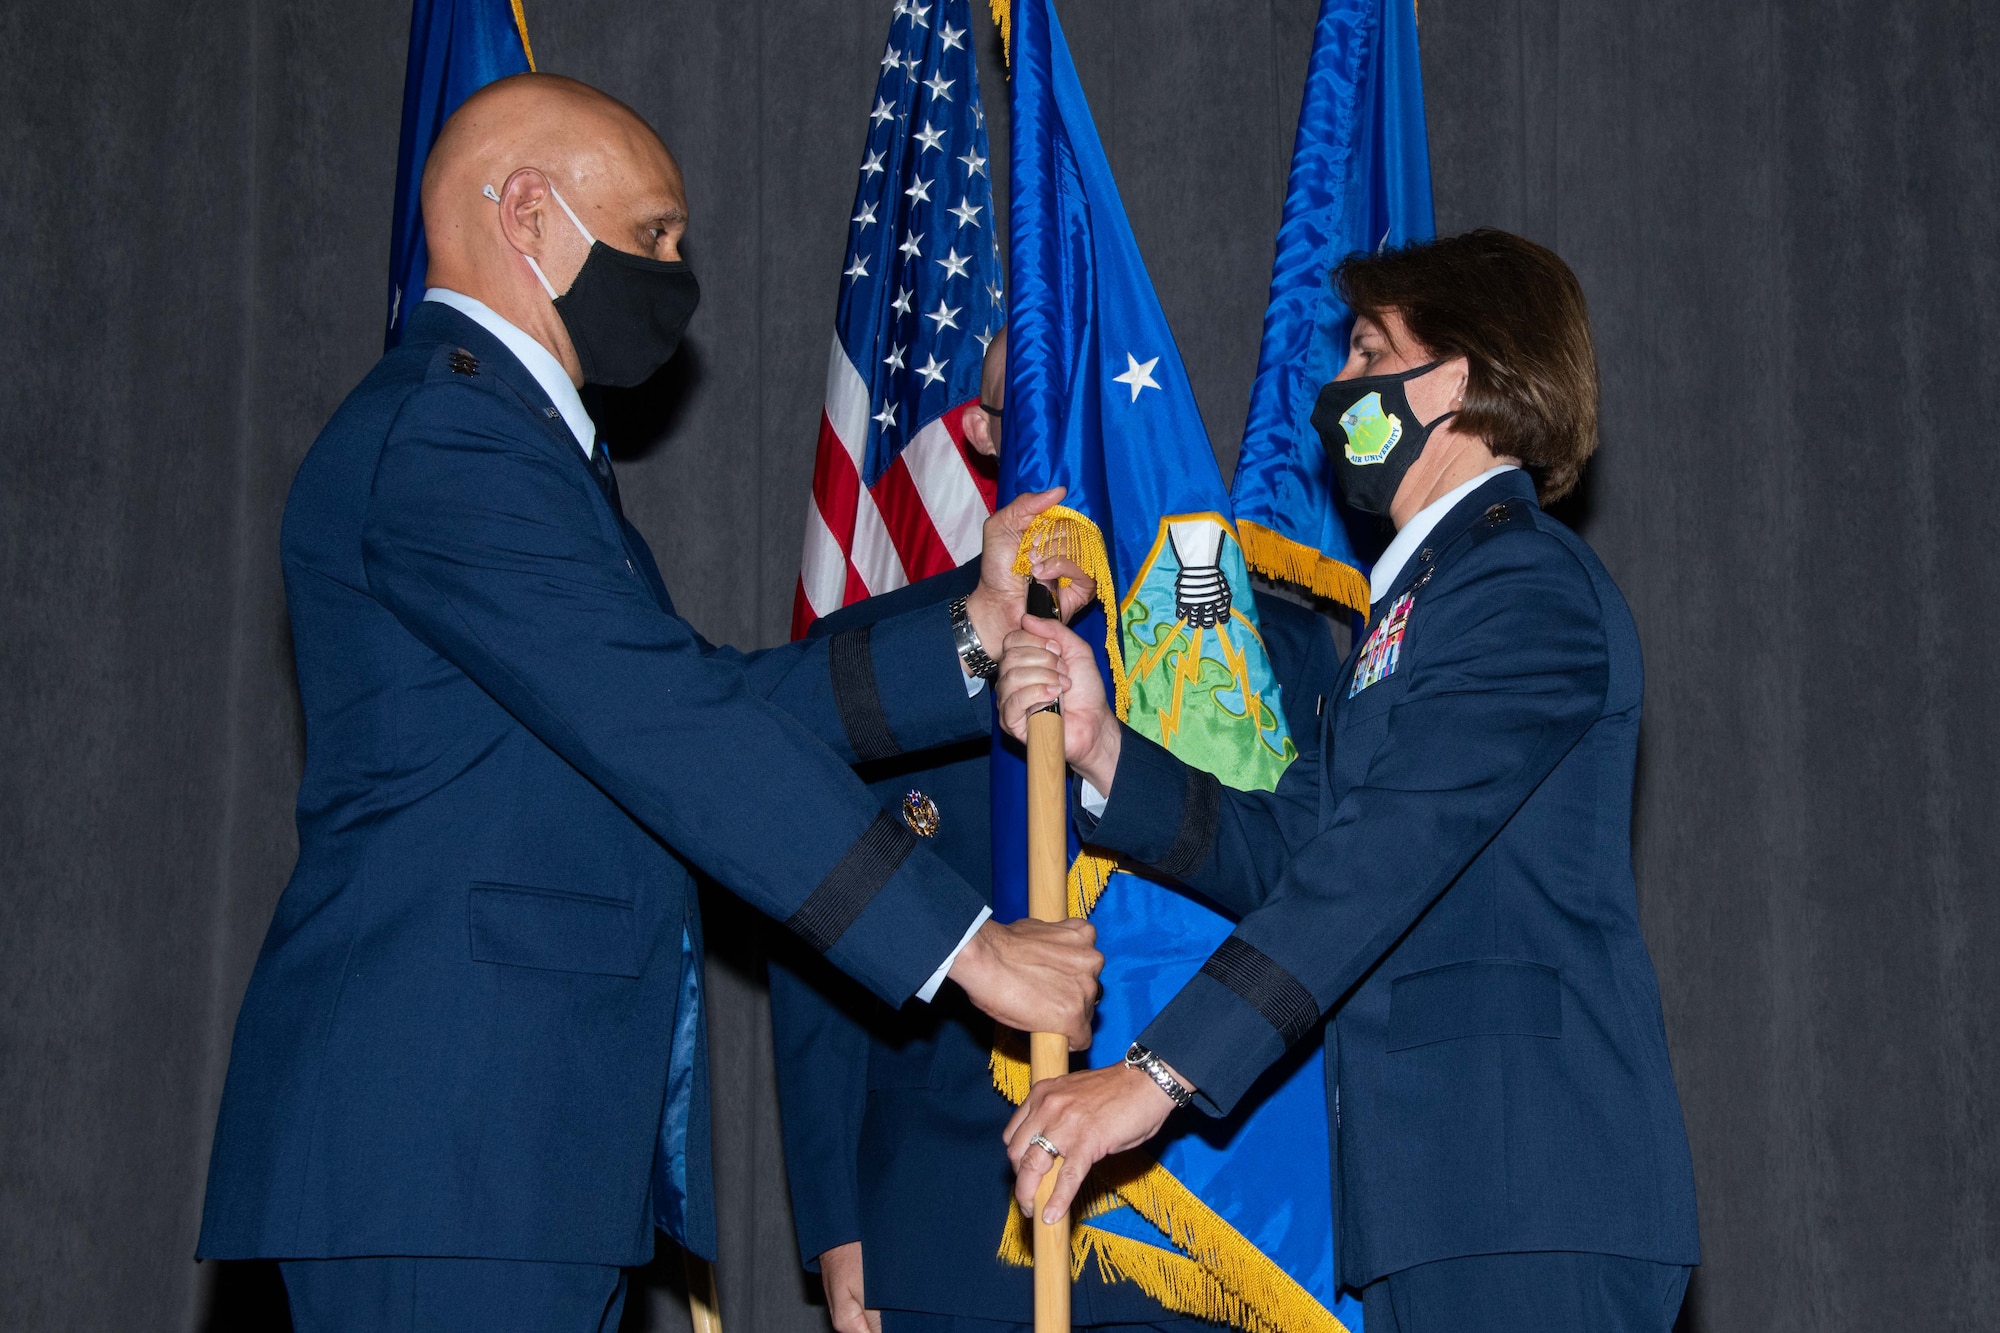 Lt. Gen. Brian Robinson, commander of Air Education and Training Command, hands the Air University guidon to Lt. Gen. Andrea Tullos during the Air University Assumption of Command Ceremony at Maxwell Air Force Base, Alabama, July 25, 2022. Tullos served as the commander of Maxwell’s 42nd Air Base Wing from 2014 to 2016, and before assuming command of Air University, she was the deputy commander of AETC. (U.S. Air Force photo by Melanie Rodgers Cox)